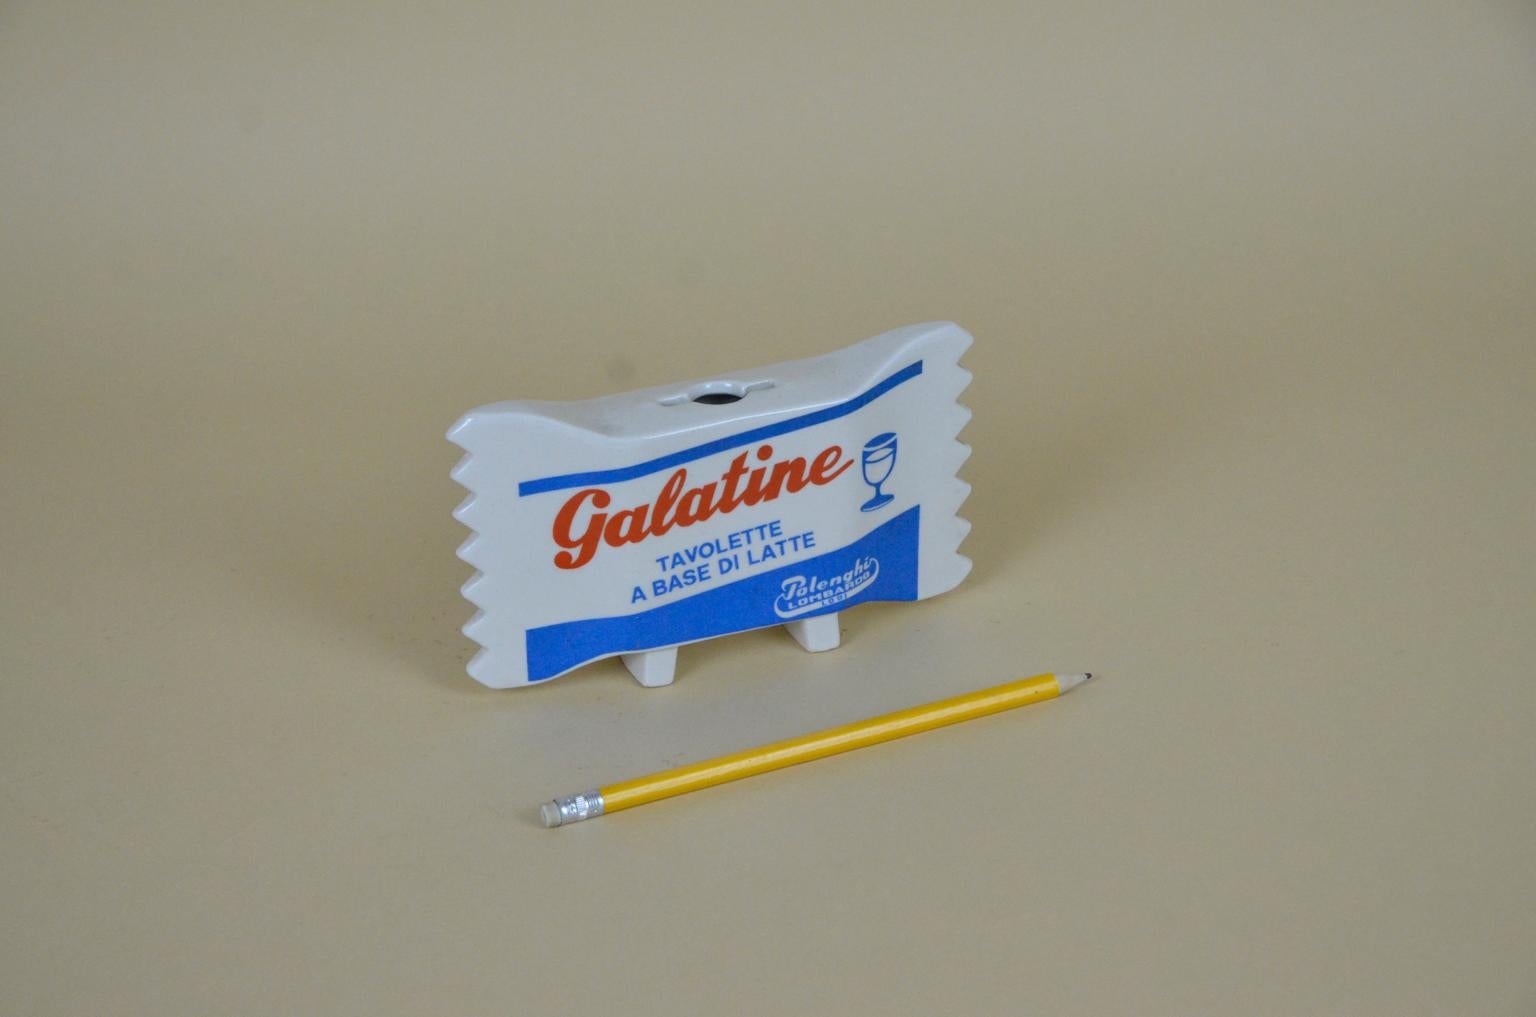 Advertising ceramic model of a Galatine Milk Candy produced in Italy in the 1960 for Polenghi Lombardo of Lodi, Lomabrdy Italy.

The model shows the brand name in red on white background and the slogan 